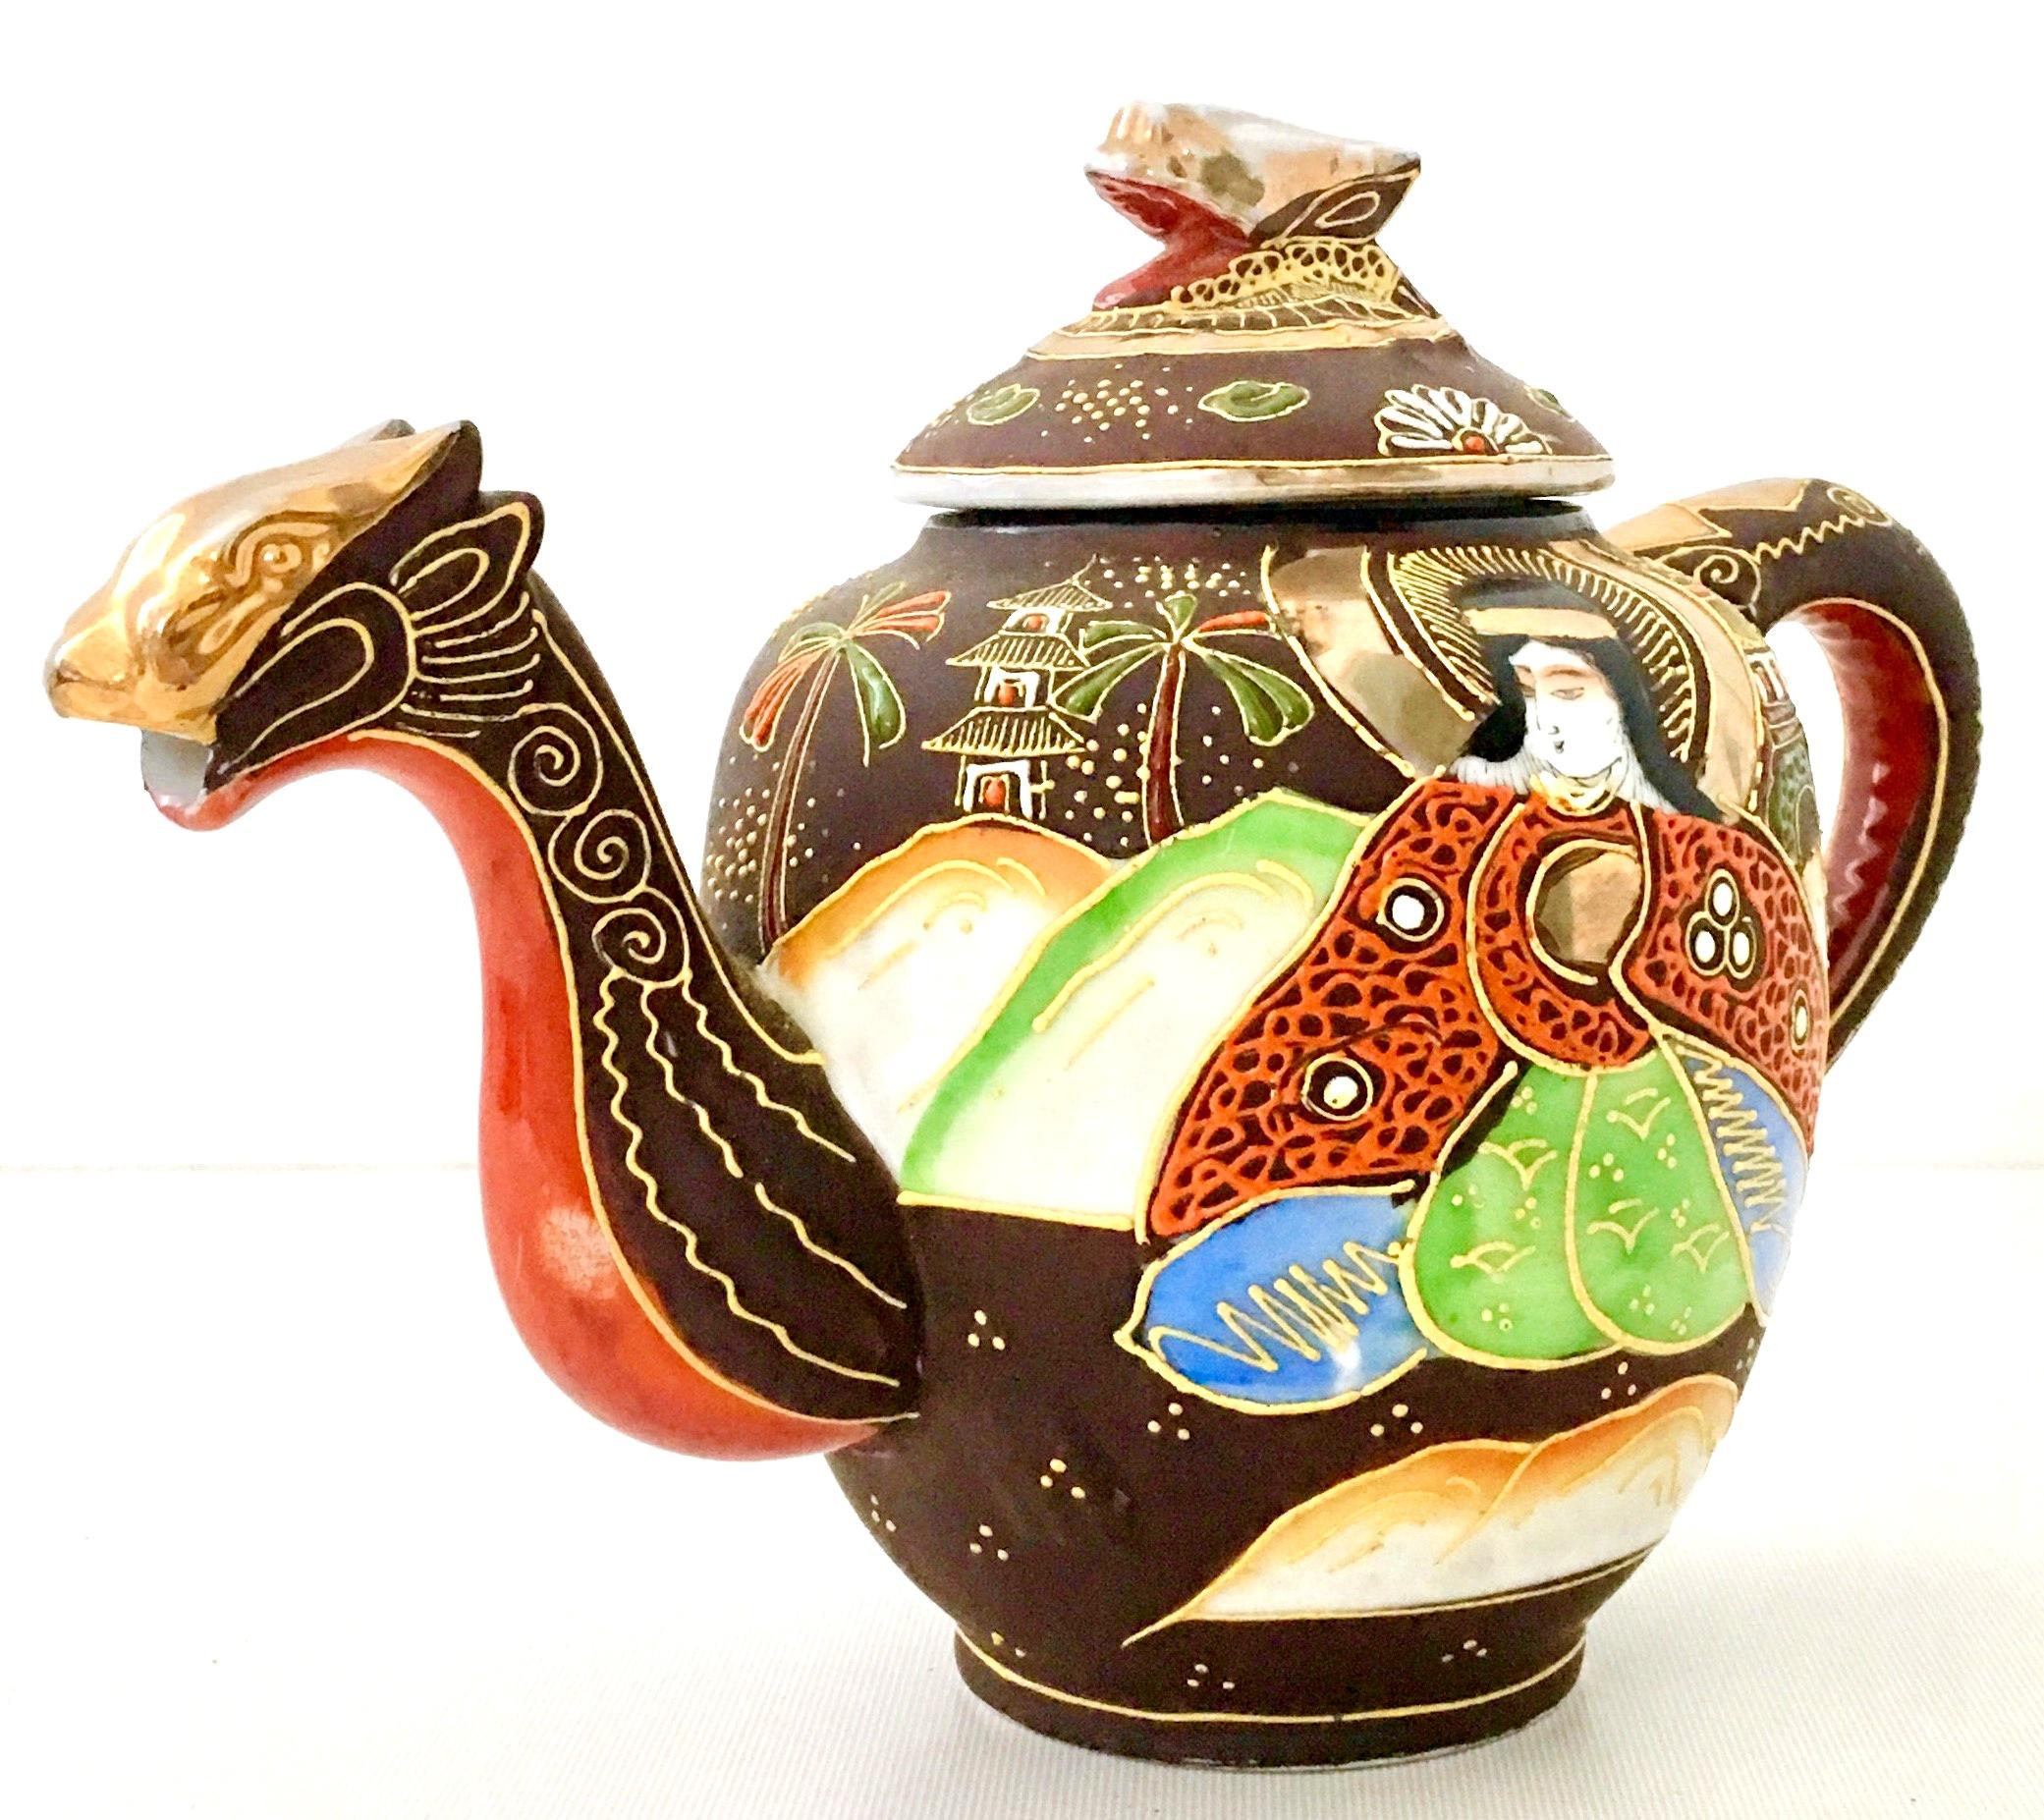 1920'S Japanese hand-painted porcelain Satsuma Moriage (raised enamel glaze) Dragon tea pot. This extraordinary tea pot with lid features a dragon form body with 